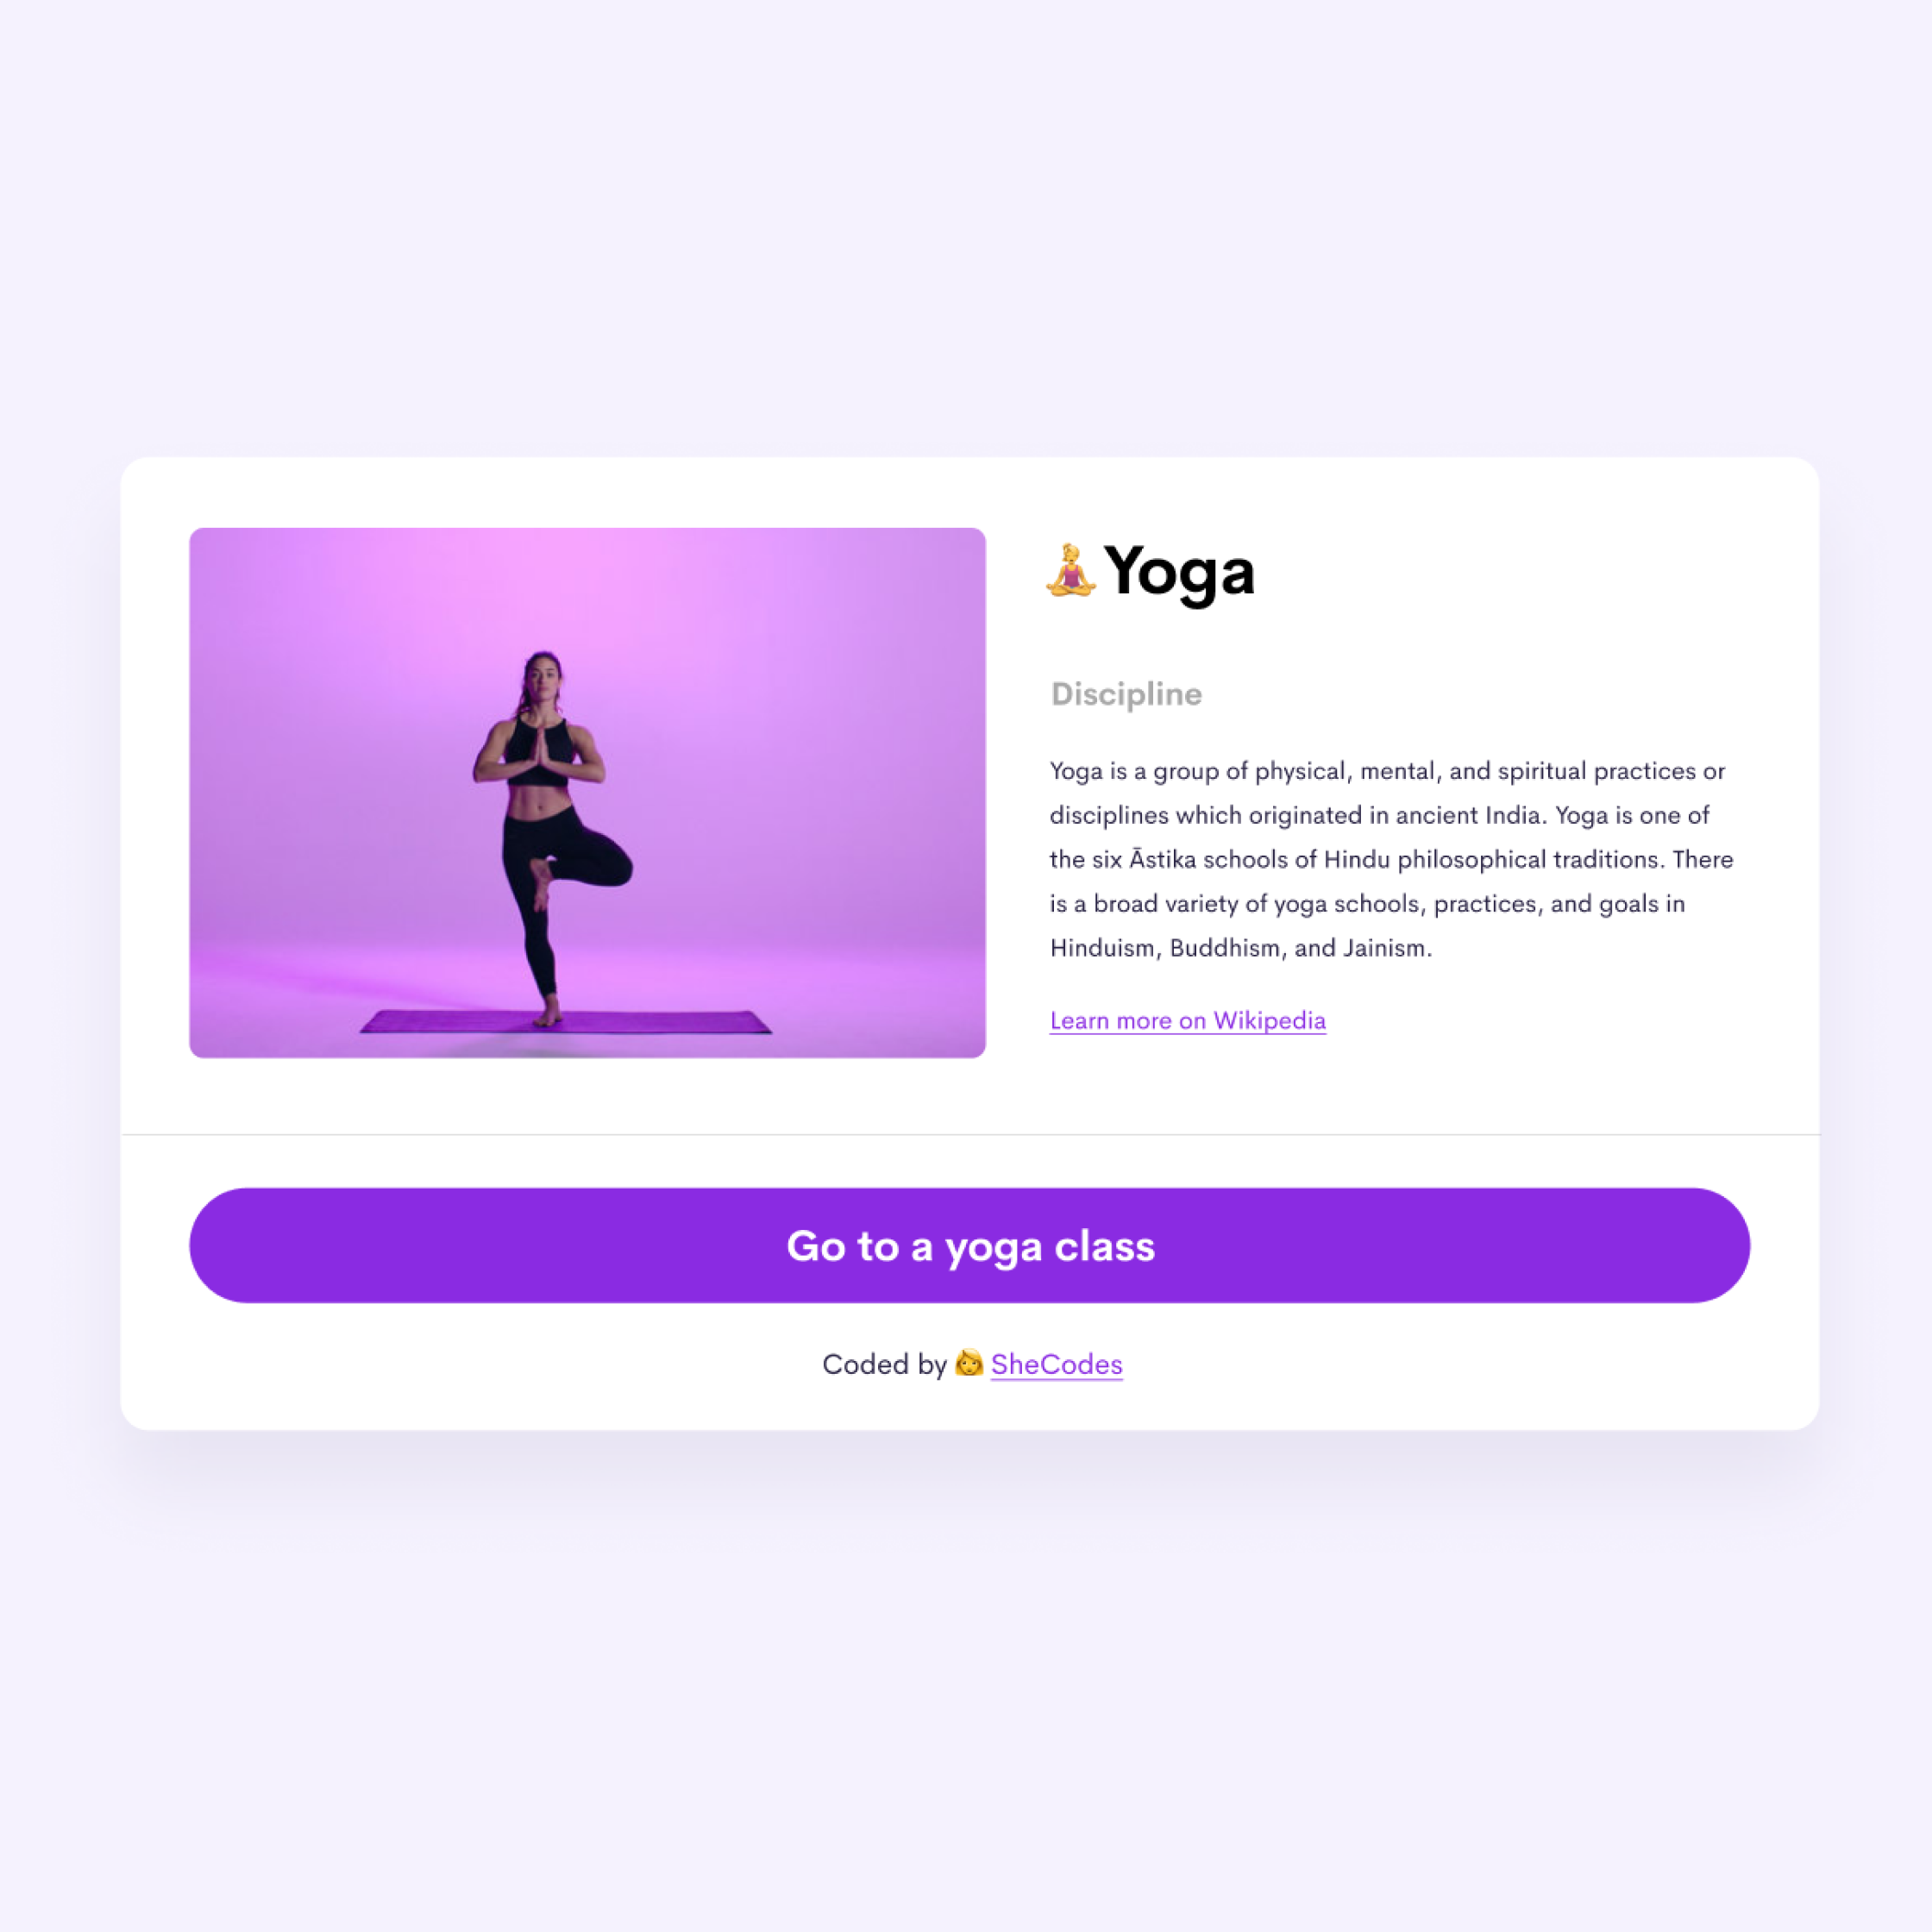 picture of a lady doing yoga